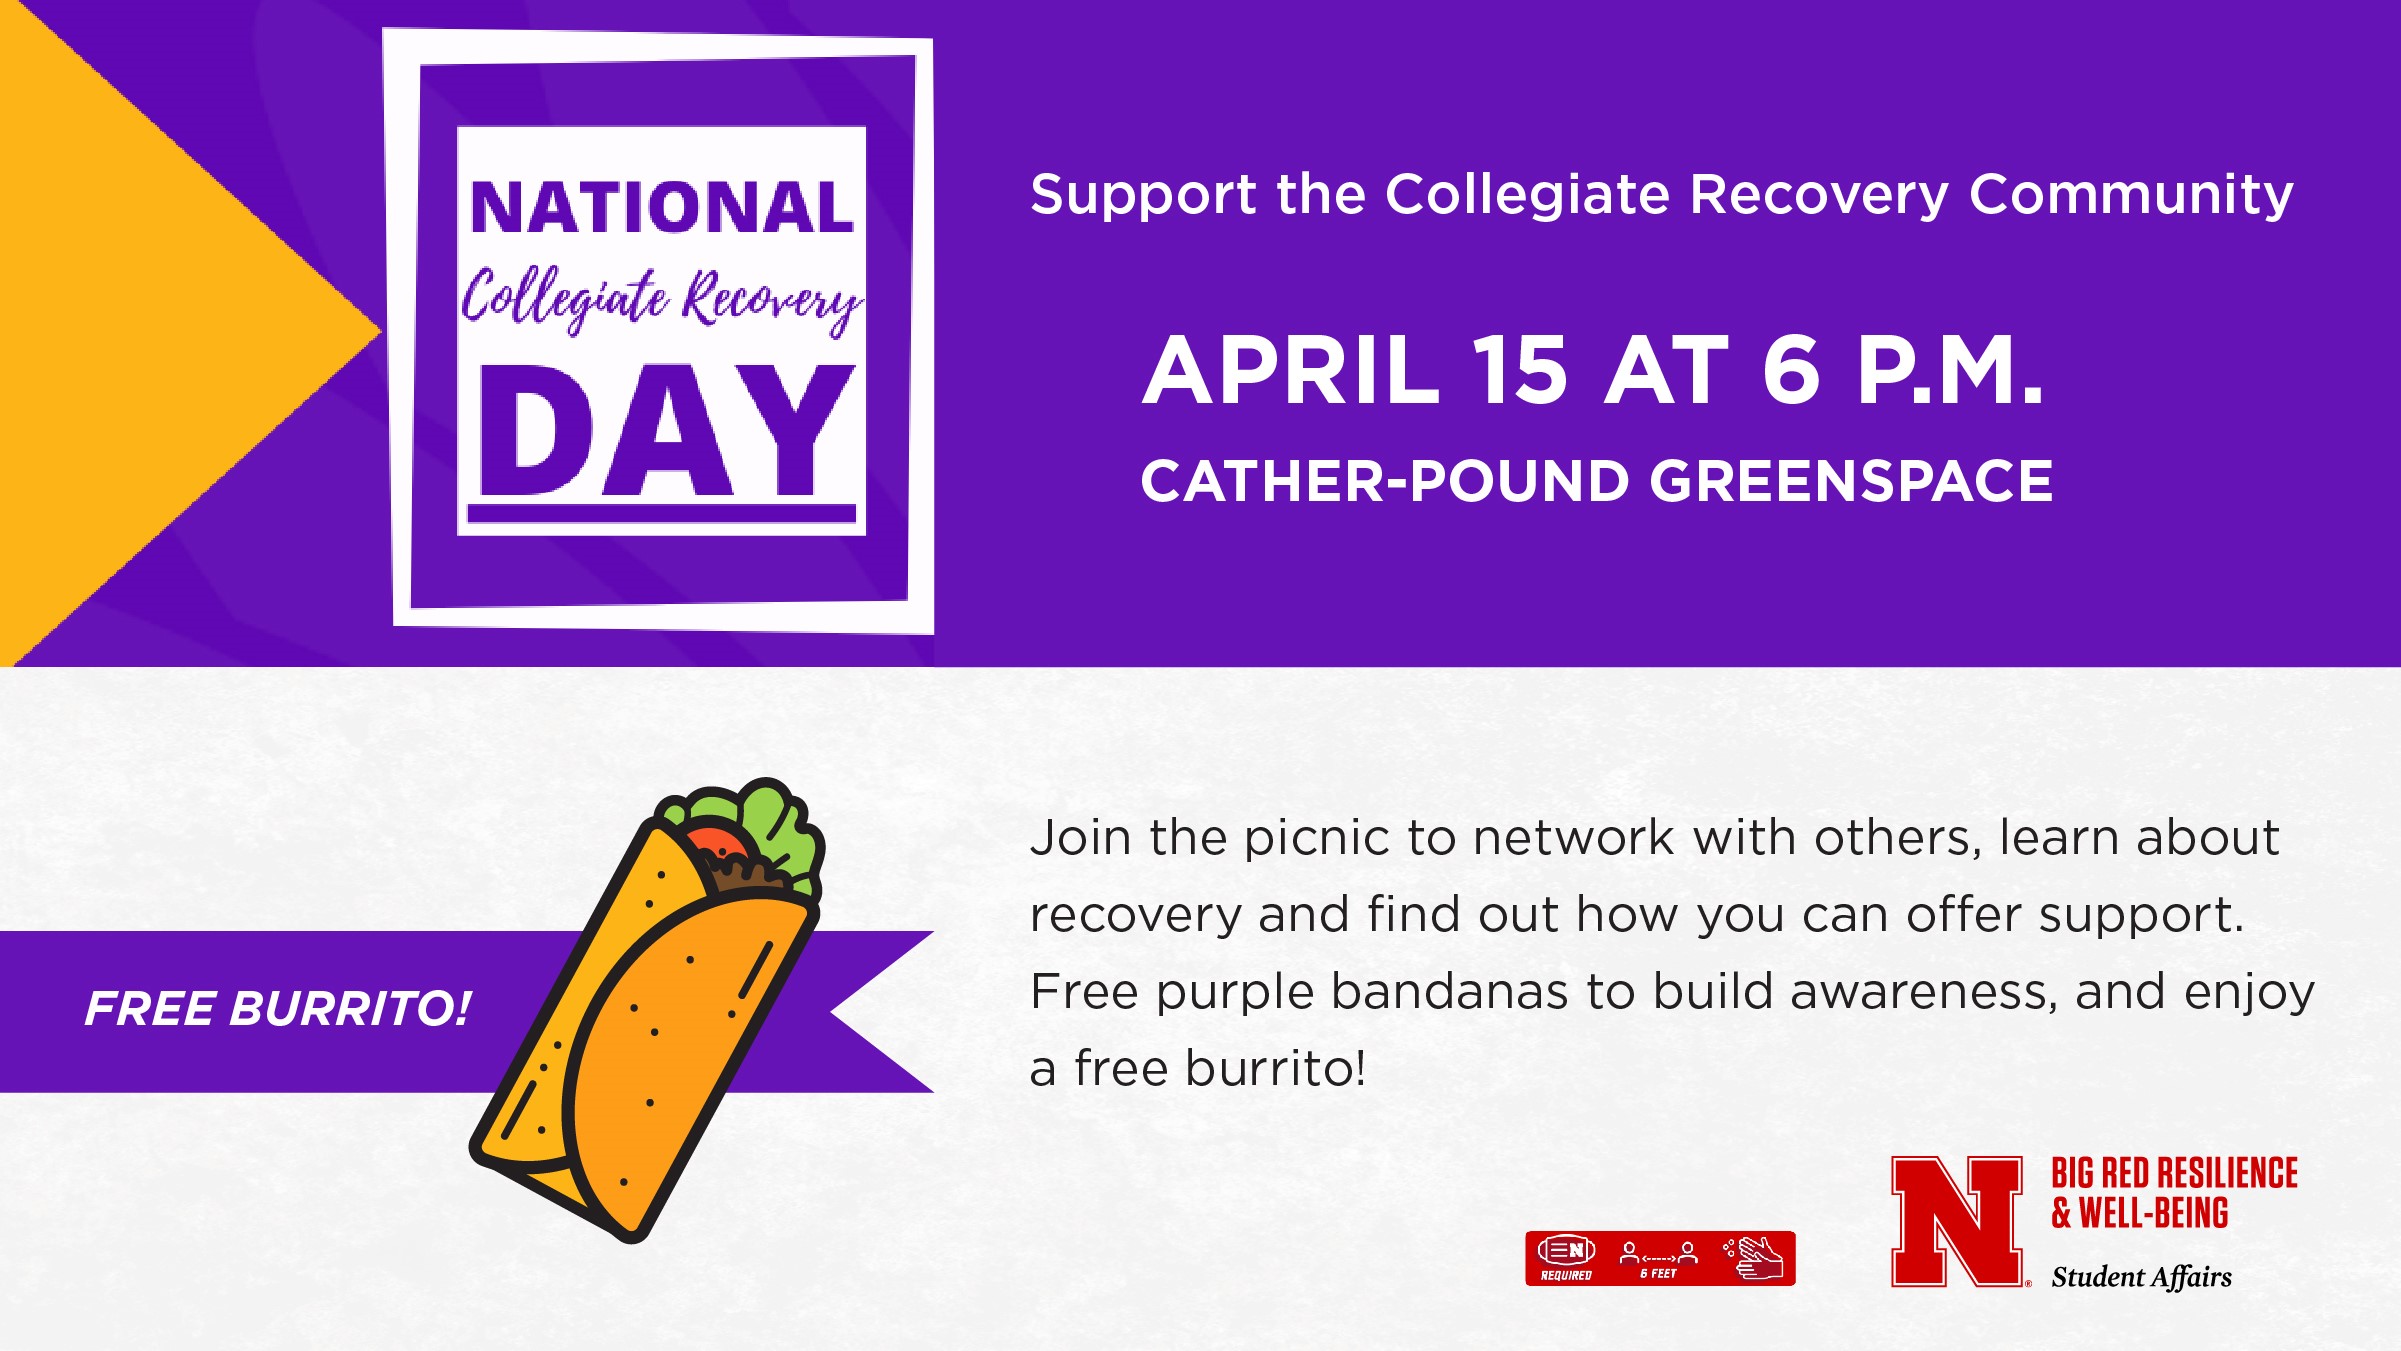 Support National Collegiate Recovery Day on April 15